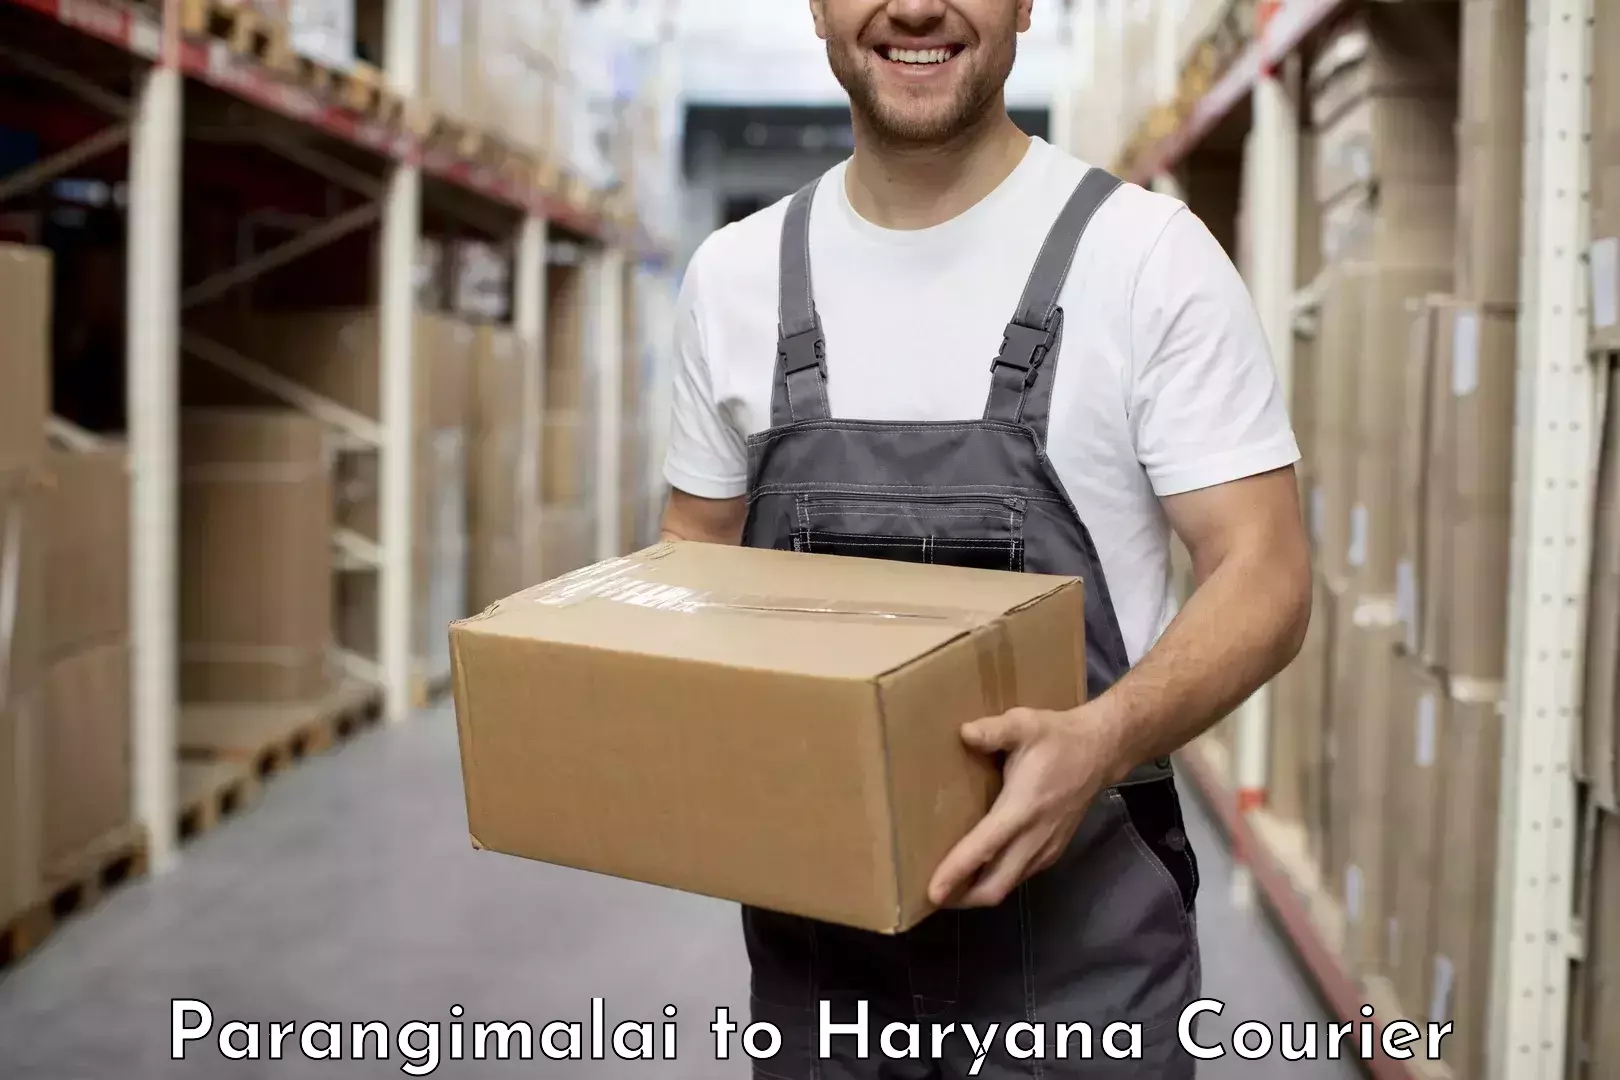 Same-day delivery solutions Parangimalai to Haryana